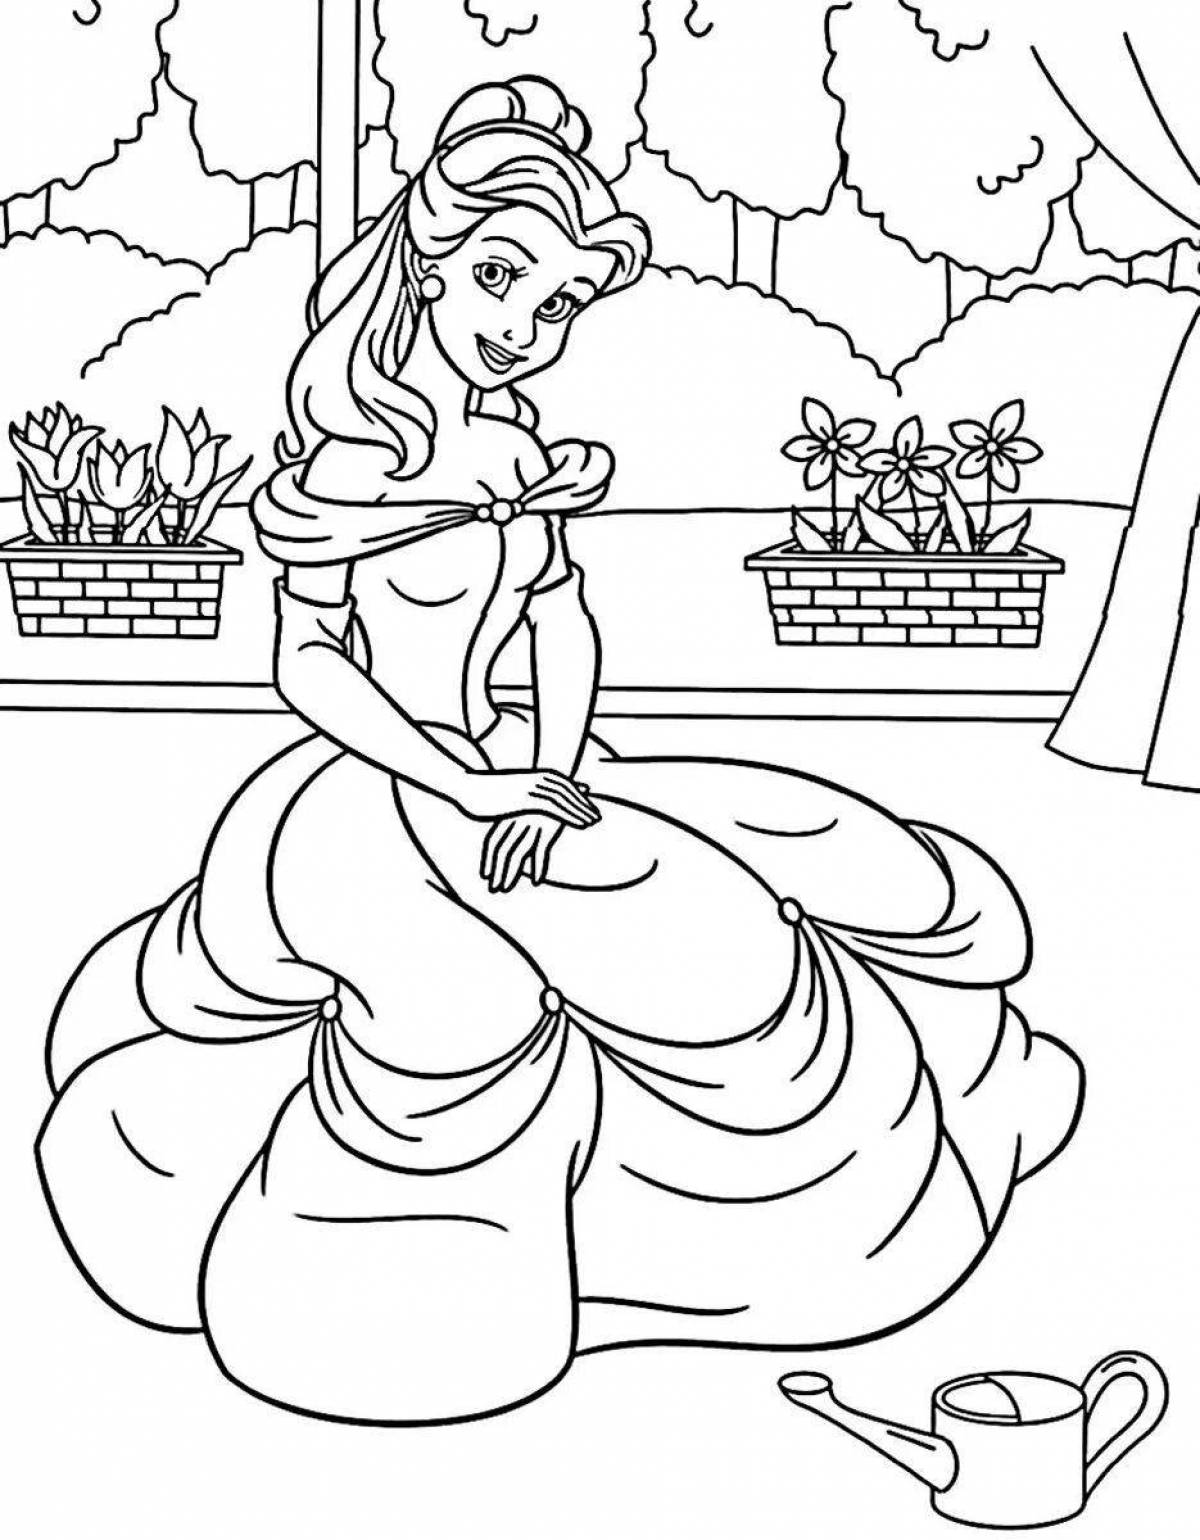 Divine coloring for girls princesses 5-6 years old